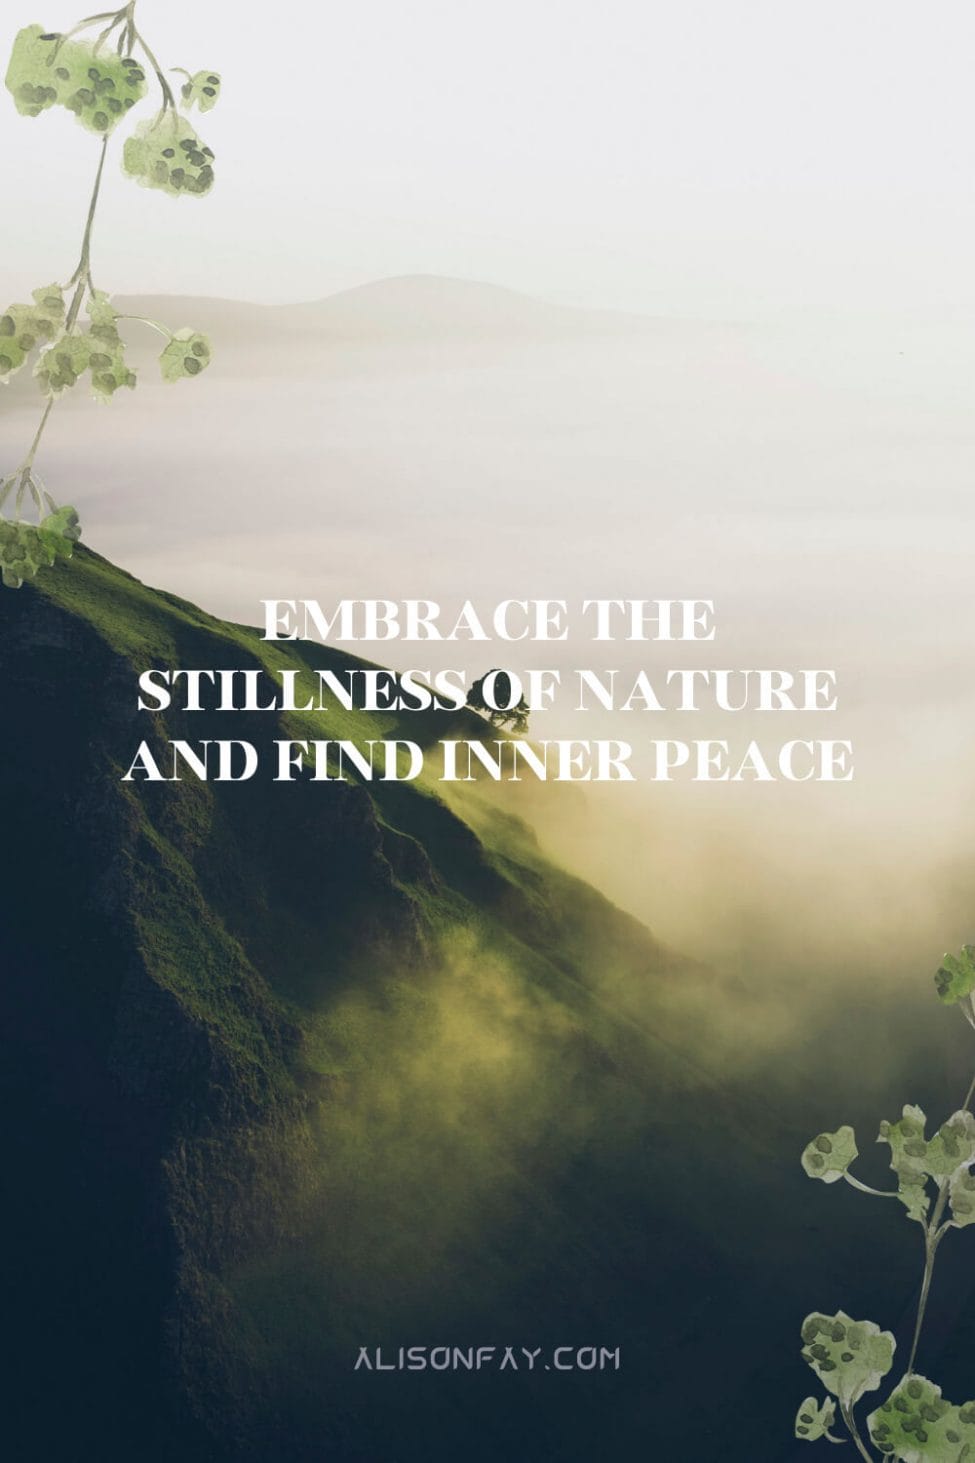 Embrace the stillness of nature and find inner peace